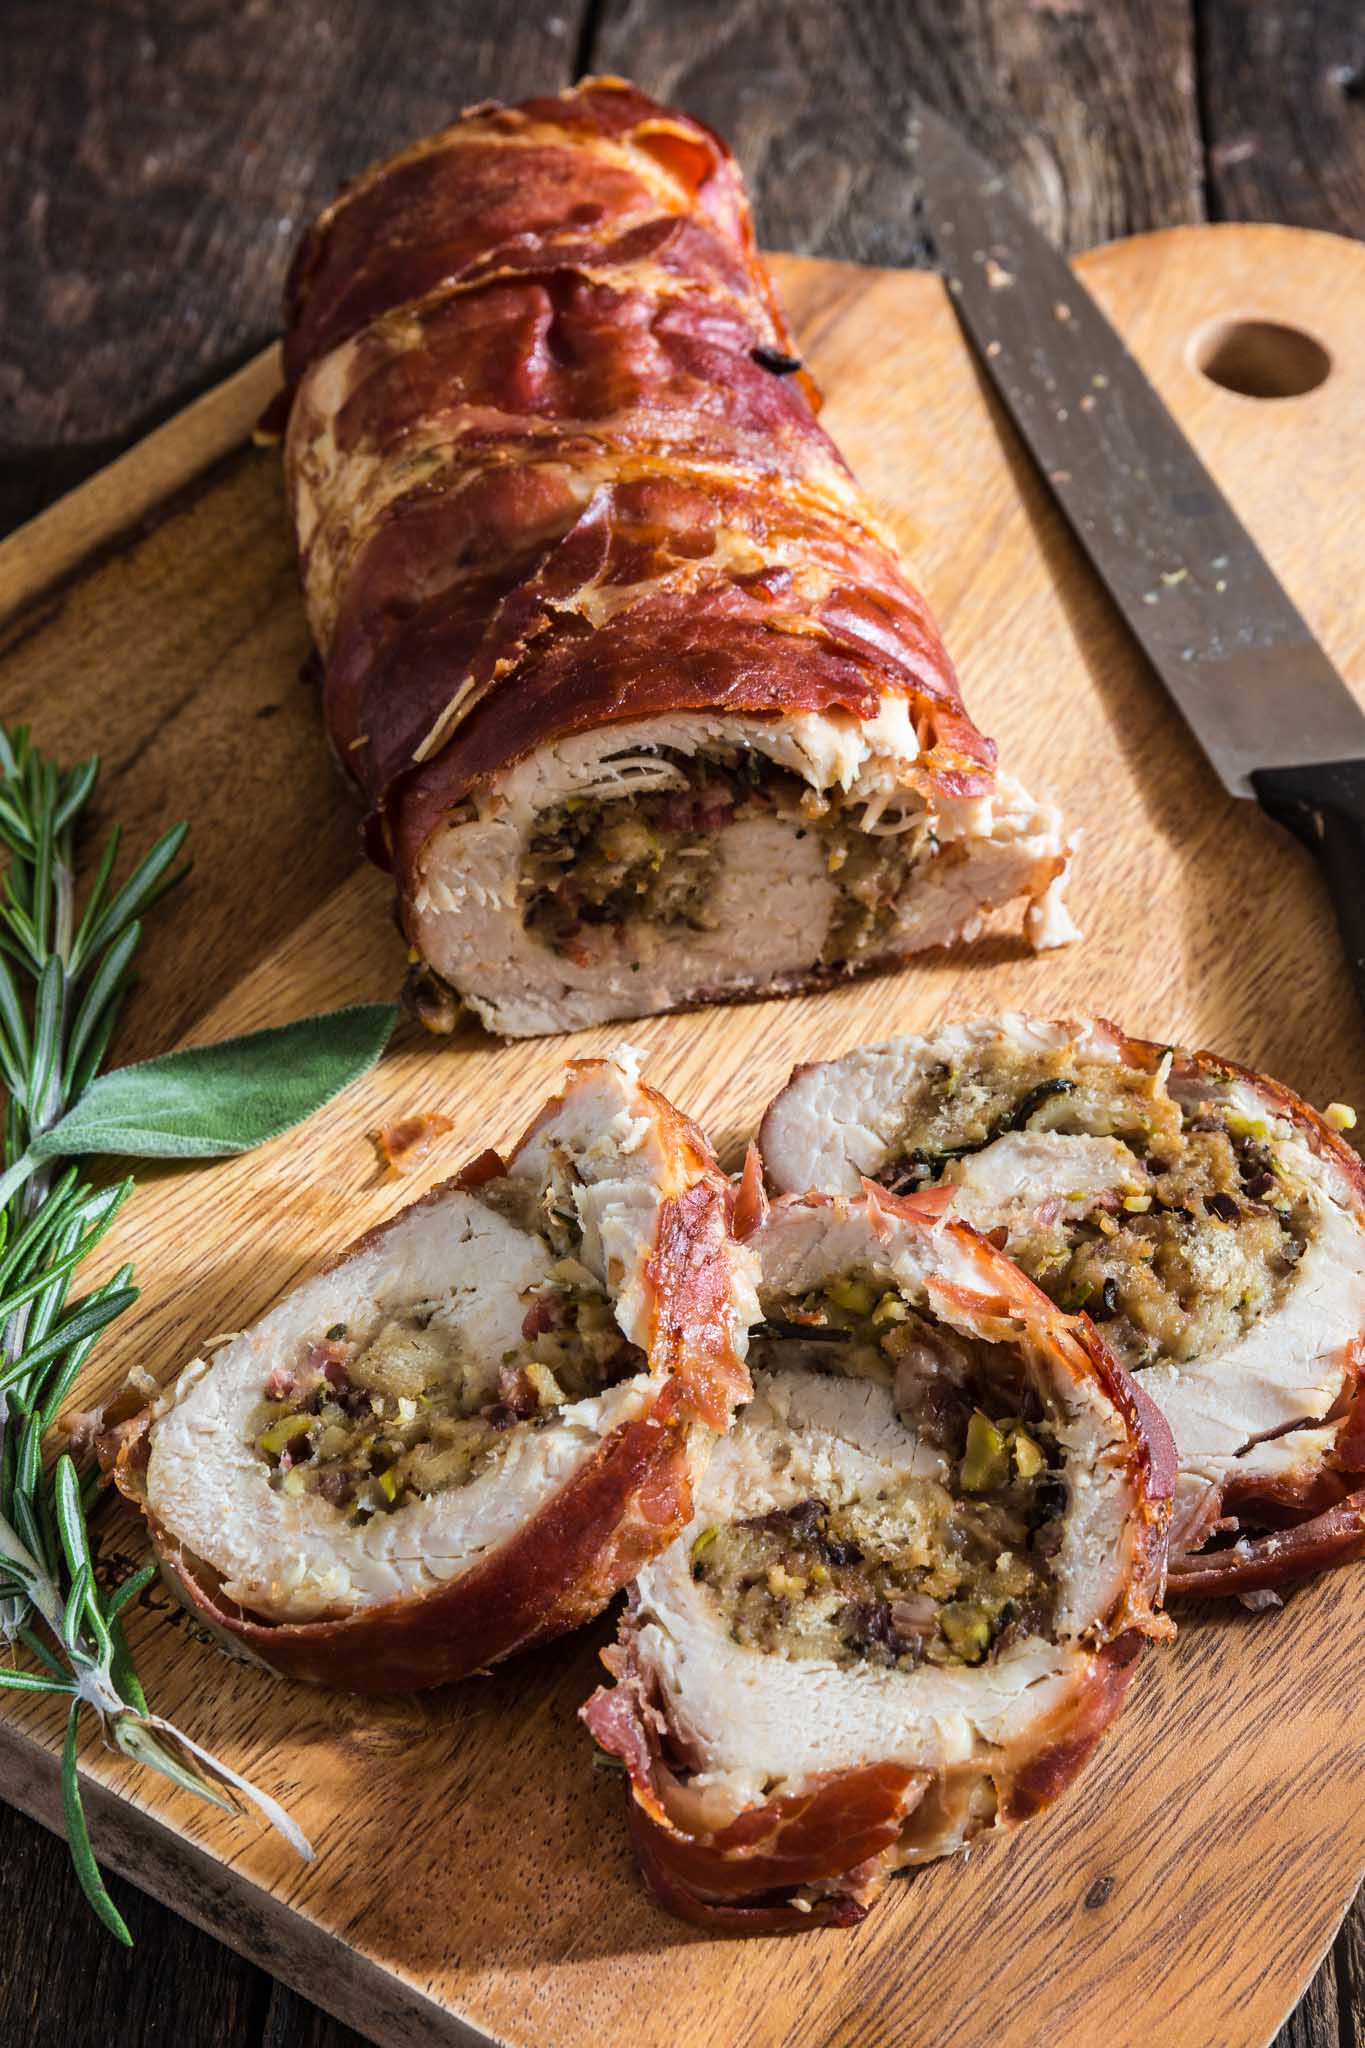 Prosciutto Wrapped Turkey Roulade with Pomegranate-Port Reduction Sauce | www.oliviascuisine.com | No time to roast a whole turkey? Knock the socks off your guests with this simple and quick to assemble turkey roulade. Moist, stuffed with pancetta, pistachio and cranberries, wrapped in Prosciutto di Parma and served with a lip-smacking pomegranate port reduction sauce. One bite and the holidays will never be the same again!